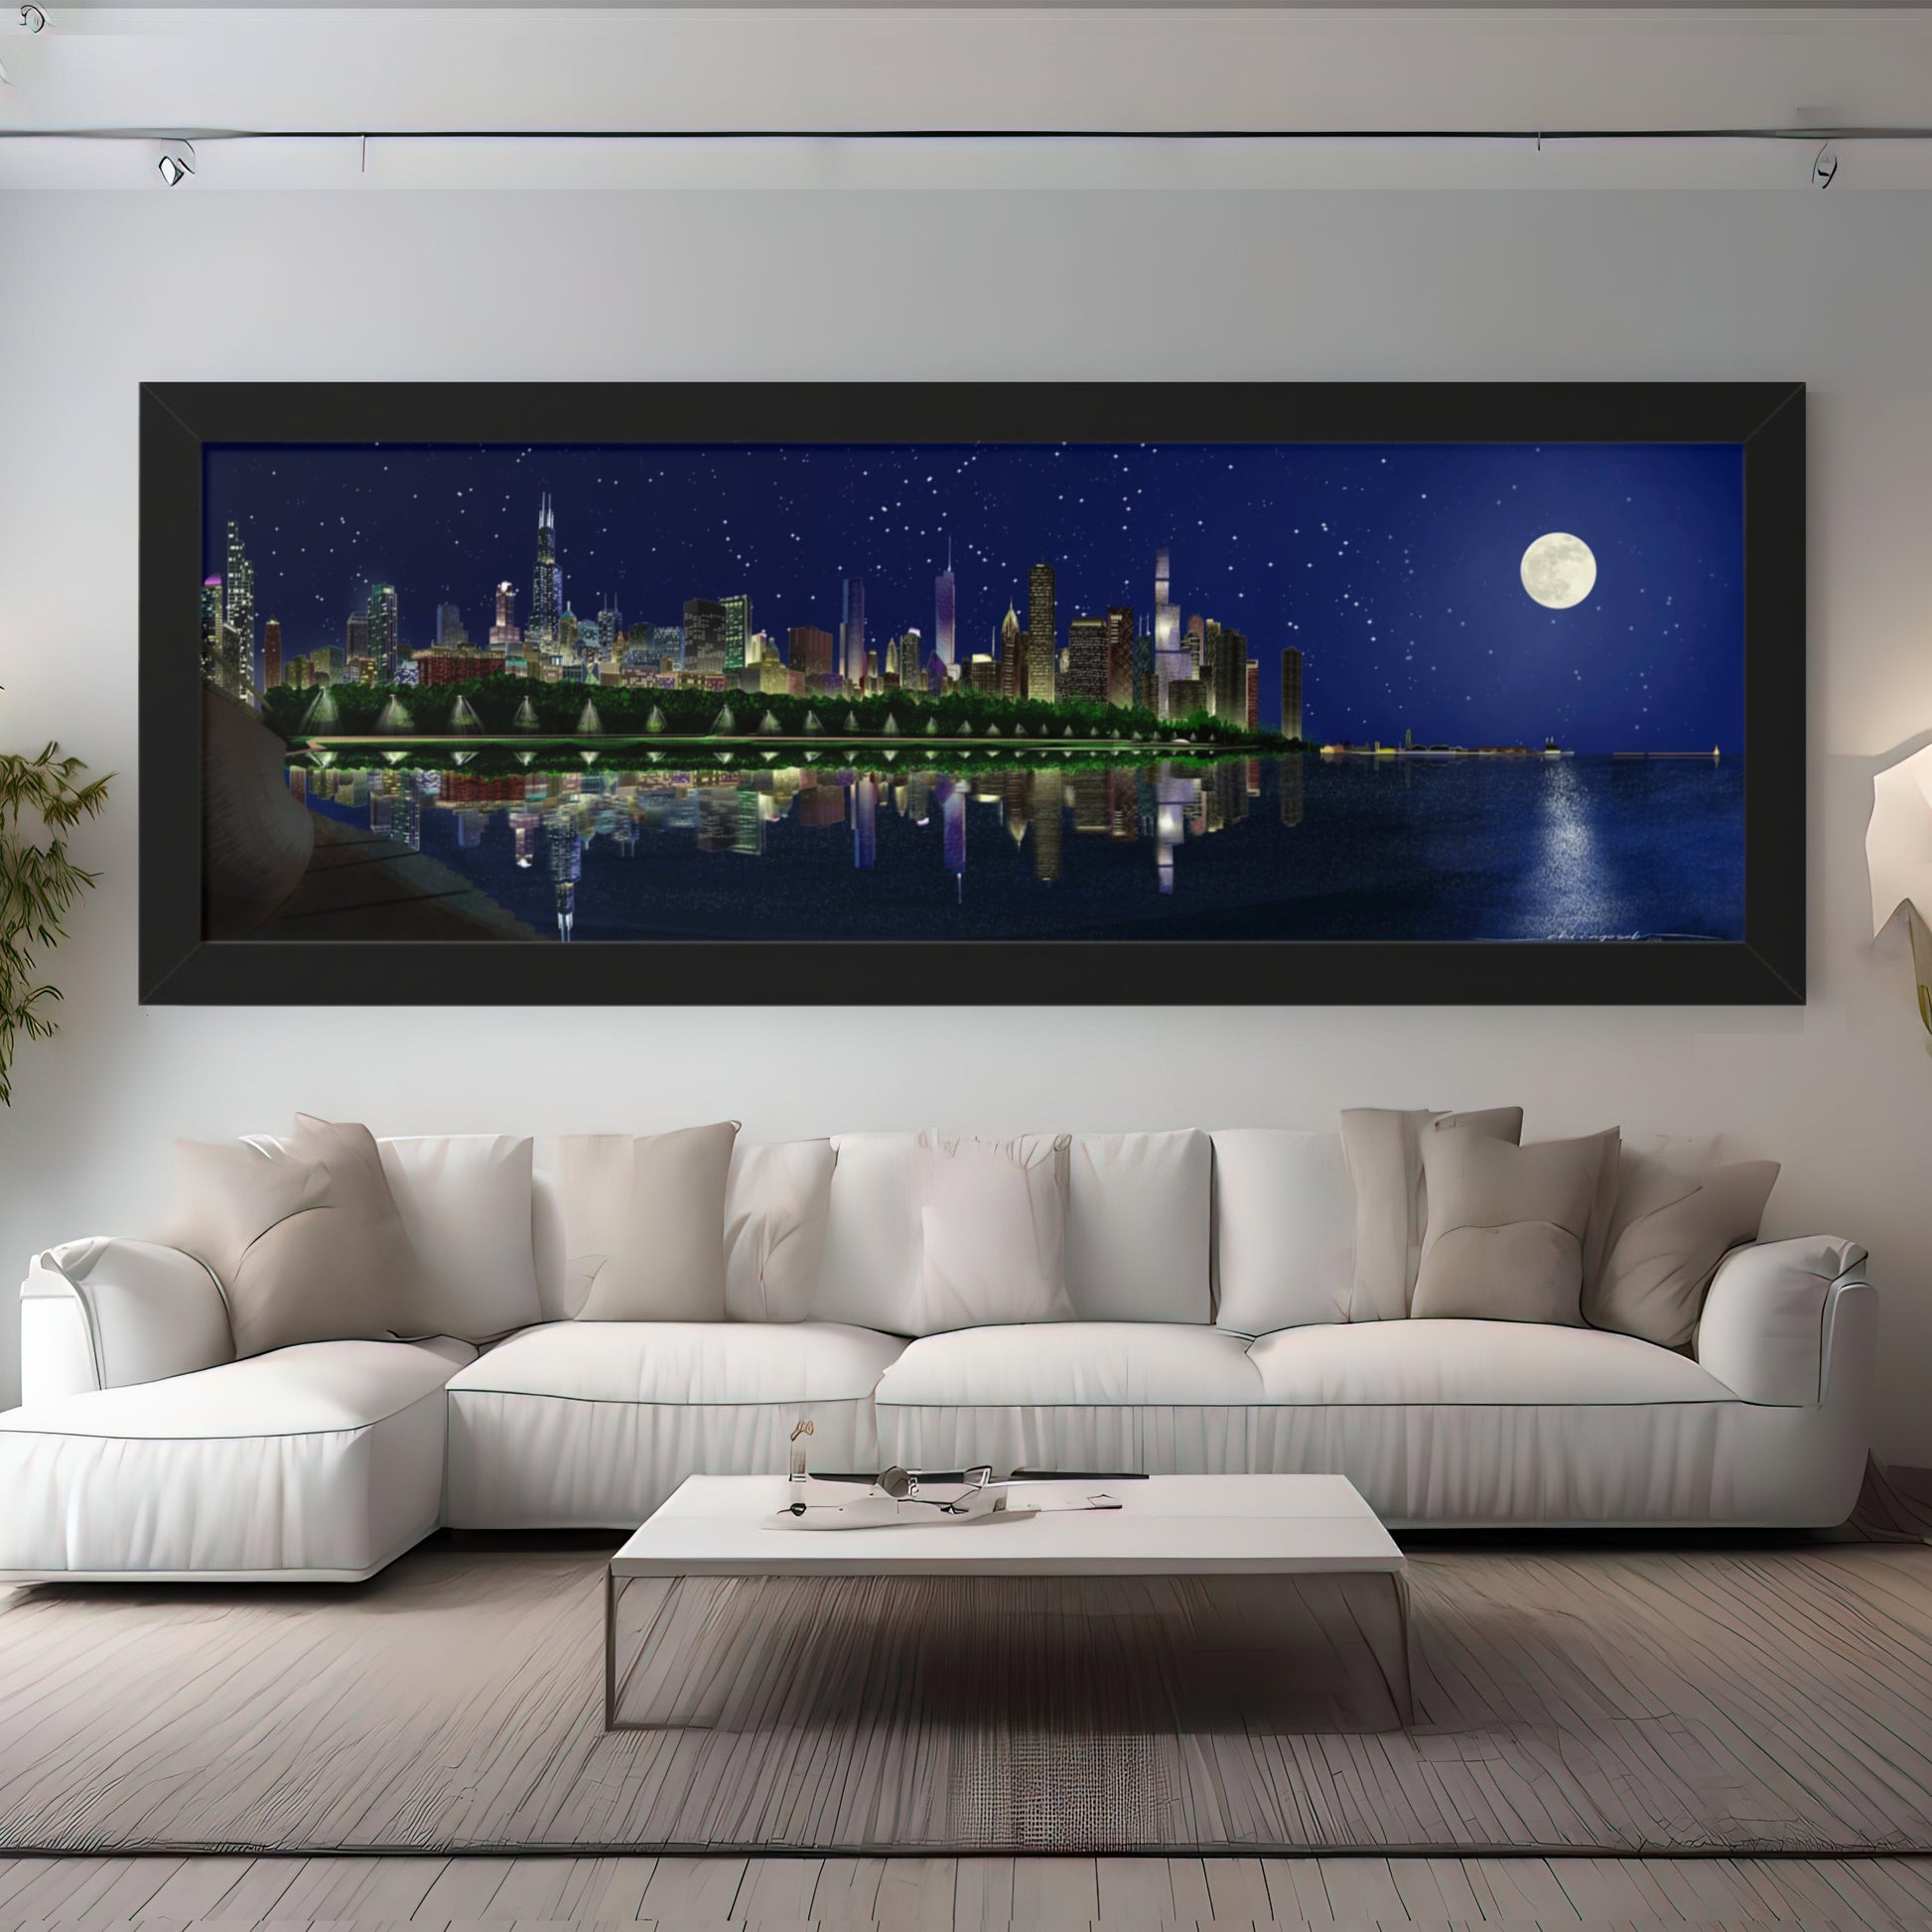 The essence of a Chicago summer night. Featuring a digital illustration of the iconic skyline, this framed print showcases a stunning panorama stretching from Shedd Aquarium to Navy Pier, where the large full moon above shines over the glowing city. Here it is framed in black.